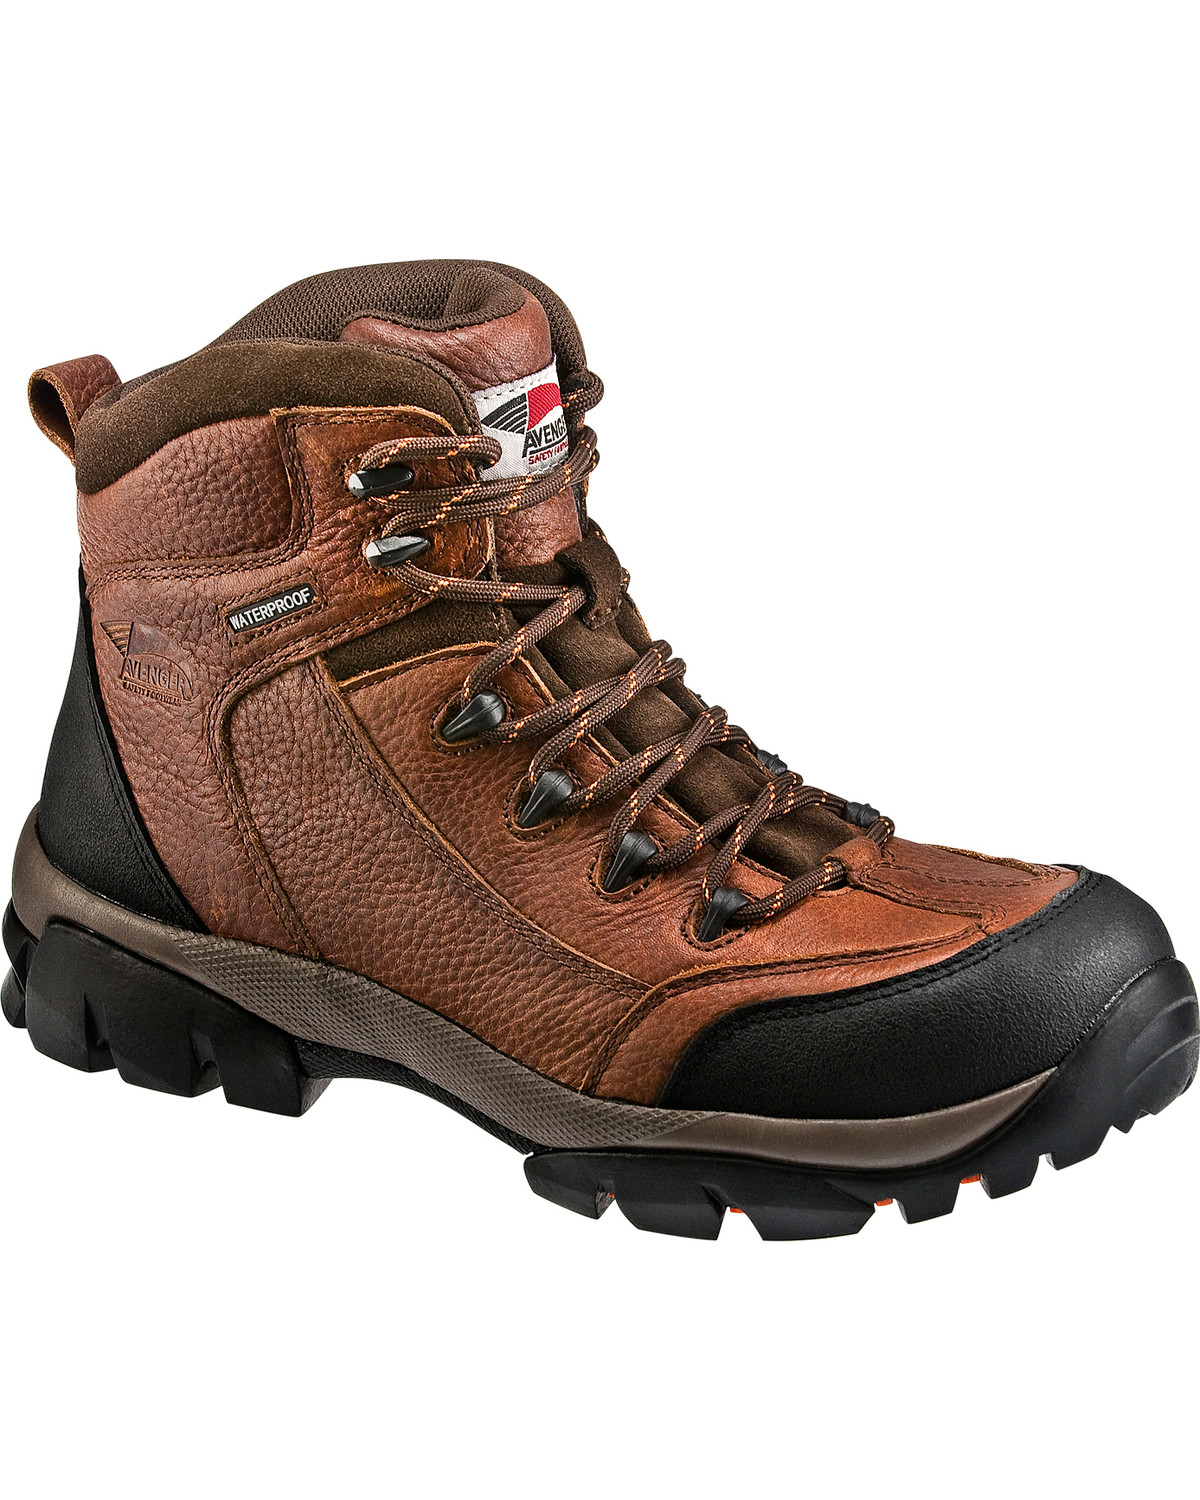 Avenger Men's No Exposed Metal Lace Up Work Boots